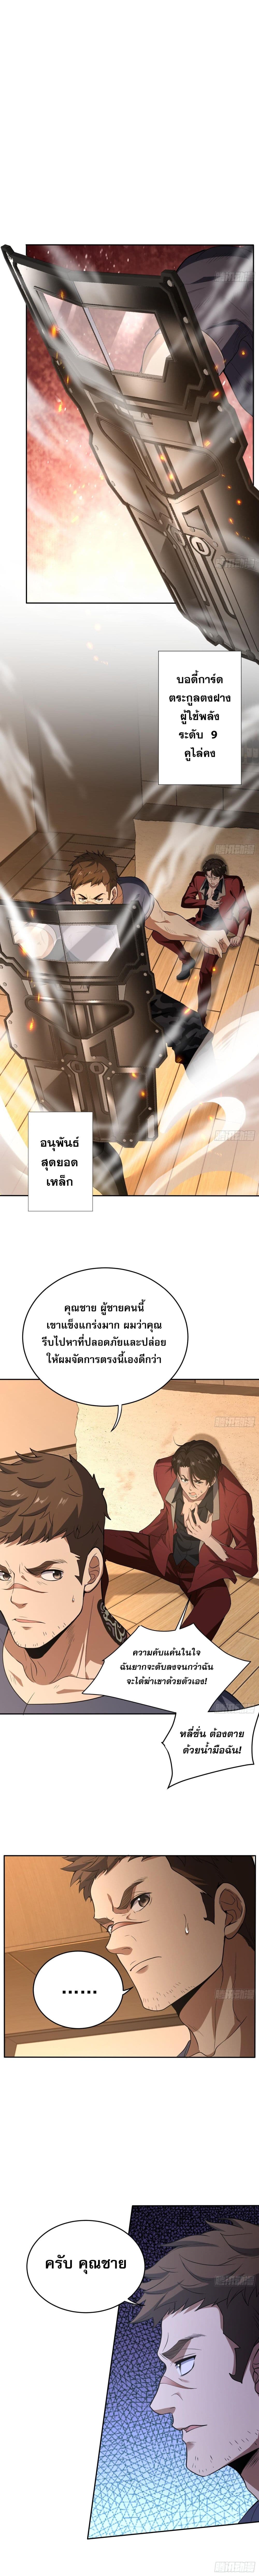 The All-Knowing Cultivator ผู้ฝึกตนผู้รอบรู้ 9/12